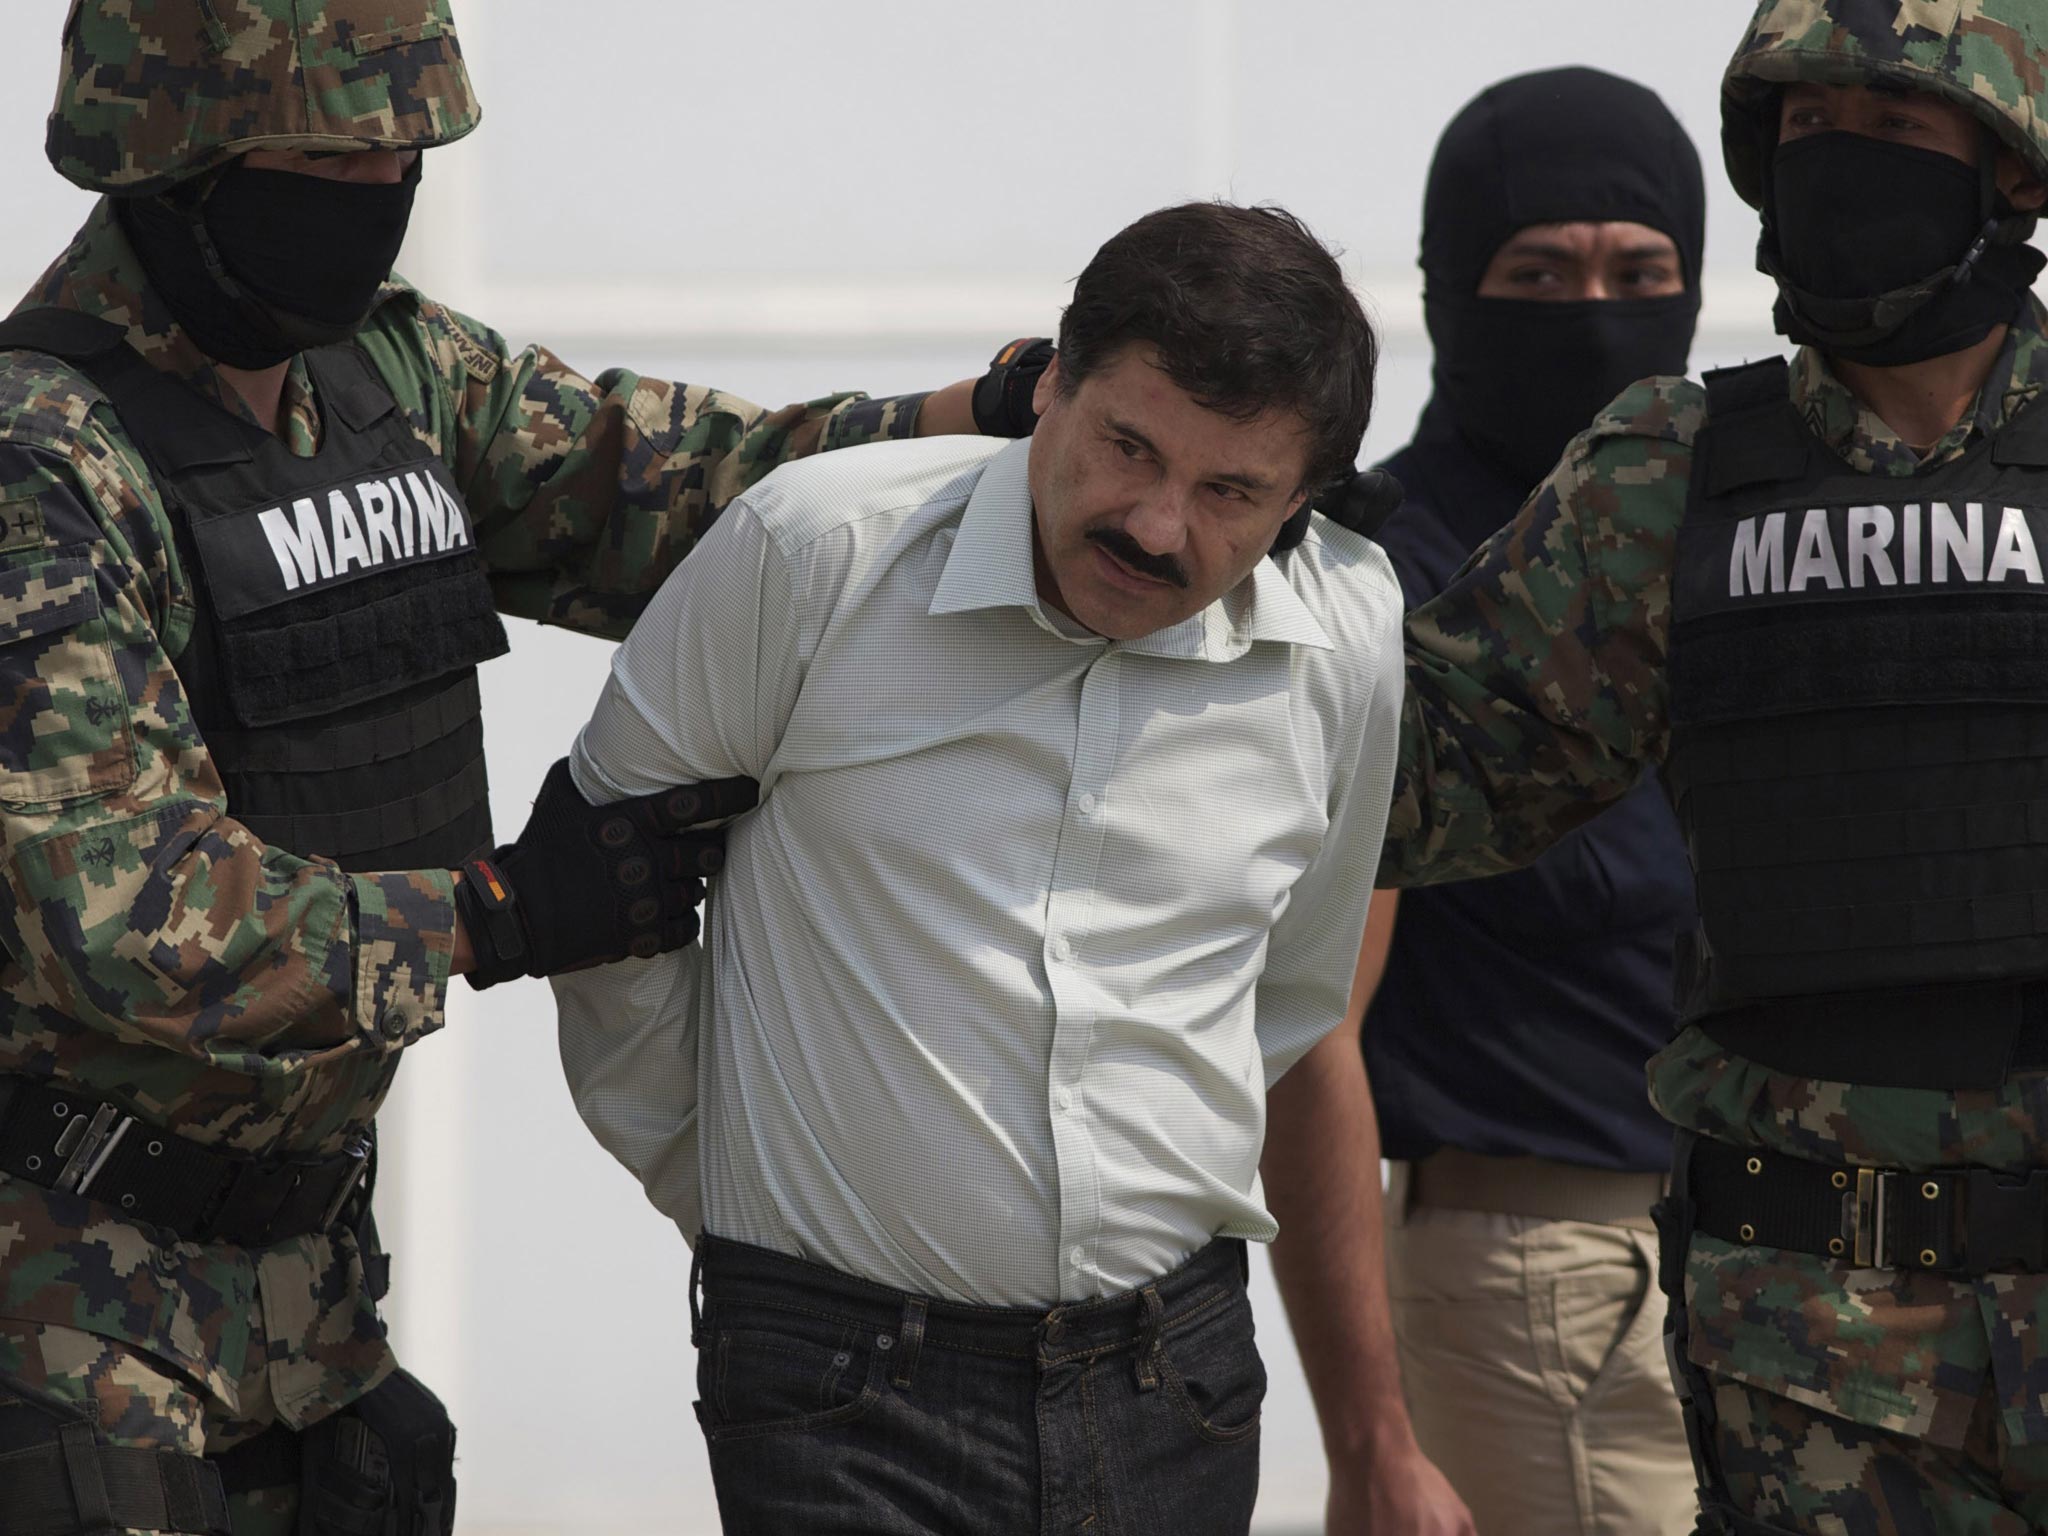 Joaquin "El Chapo" Guzman is escorted to a helicopter in handcuffs by Mexican navy marines